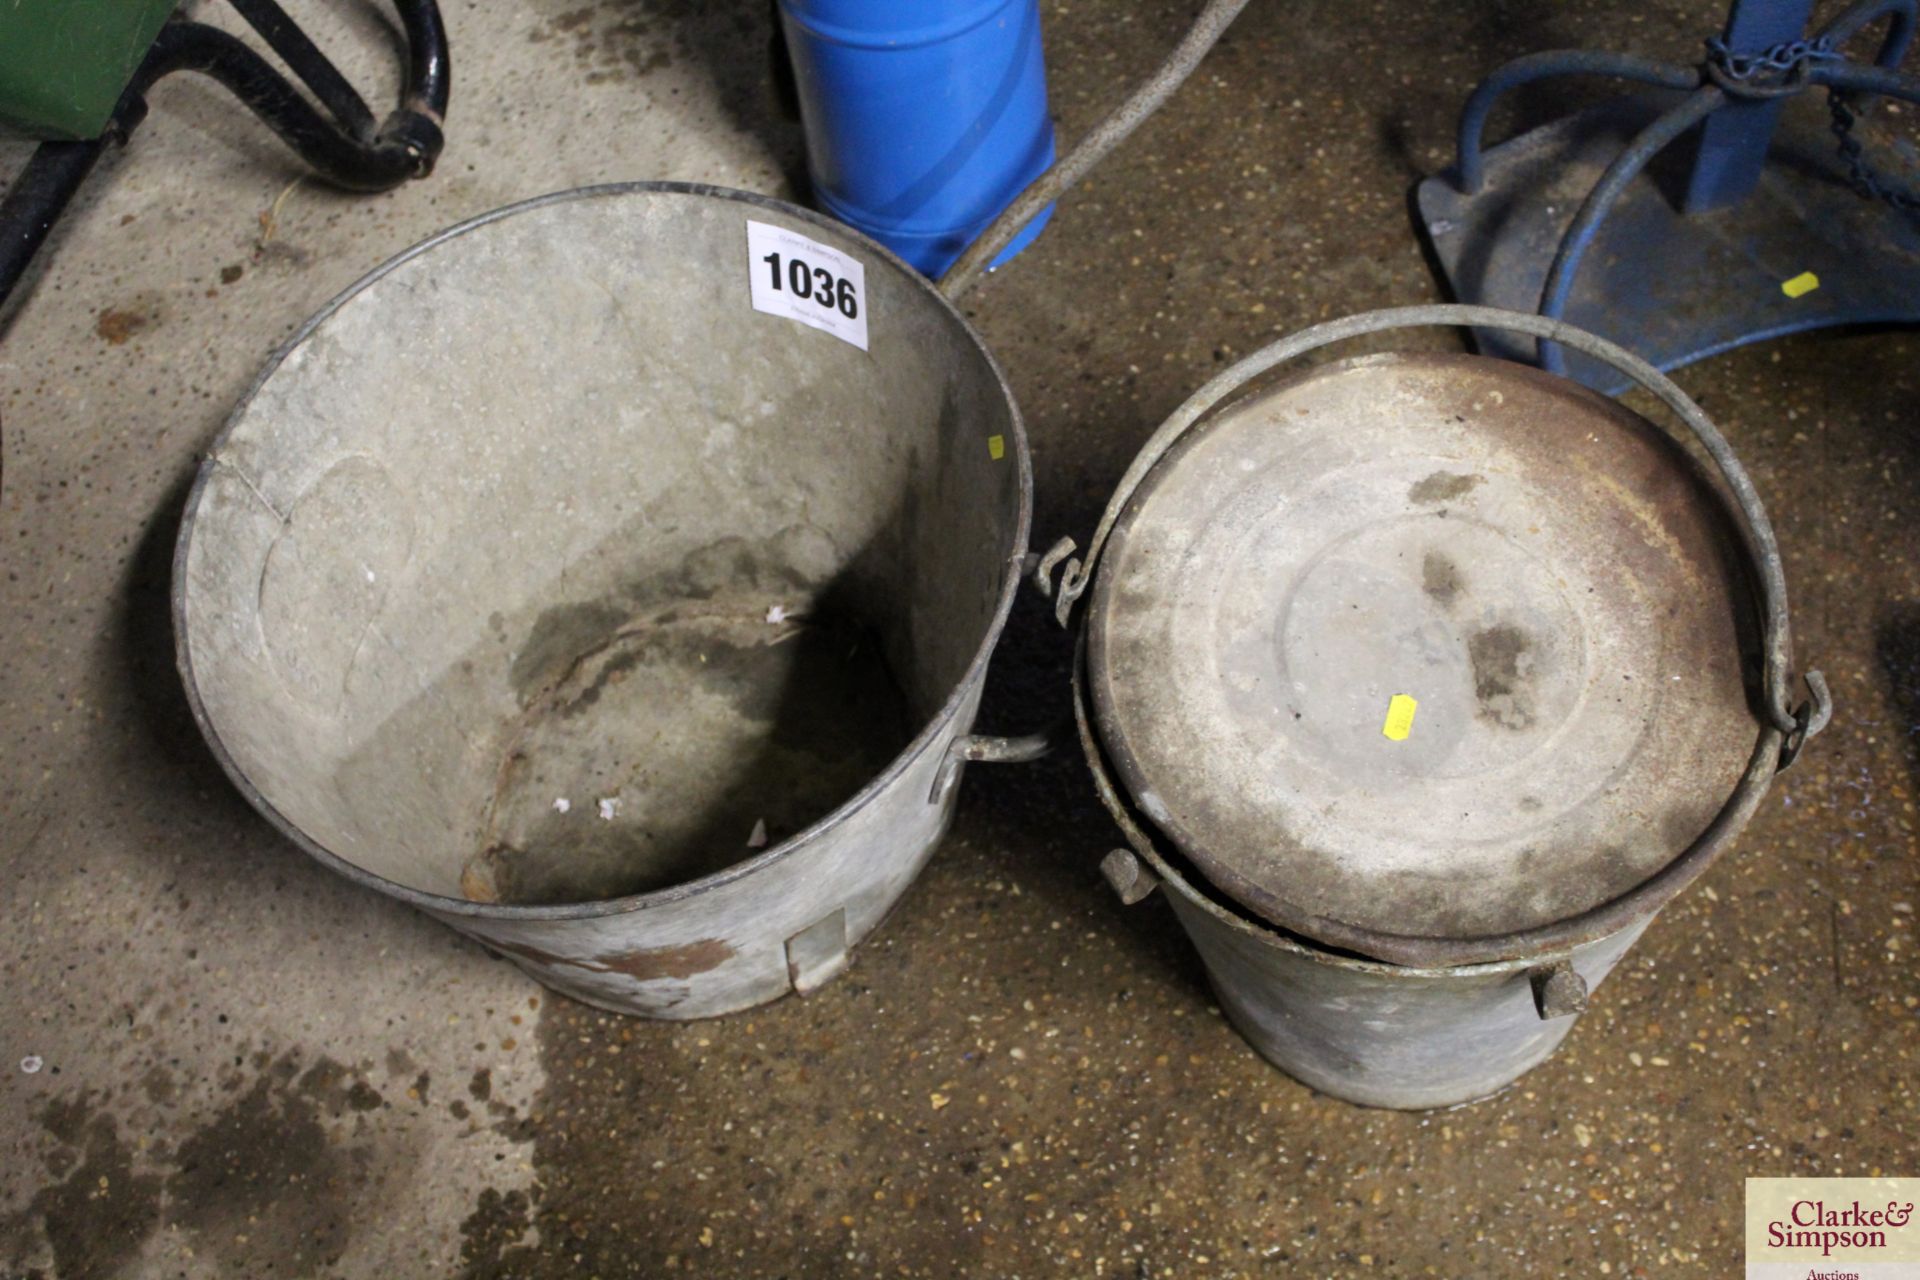 Galvanised feed hod and pail of grease.